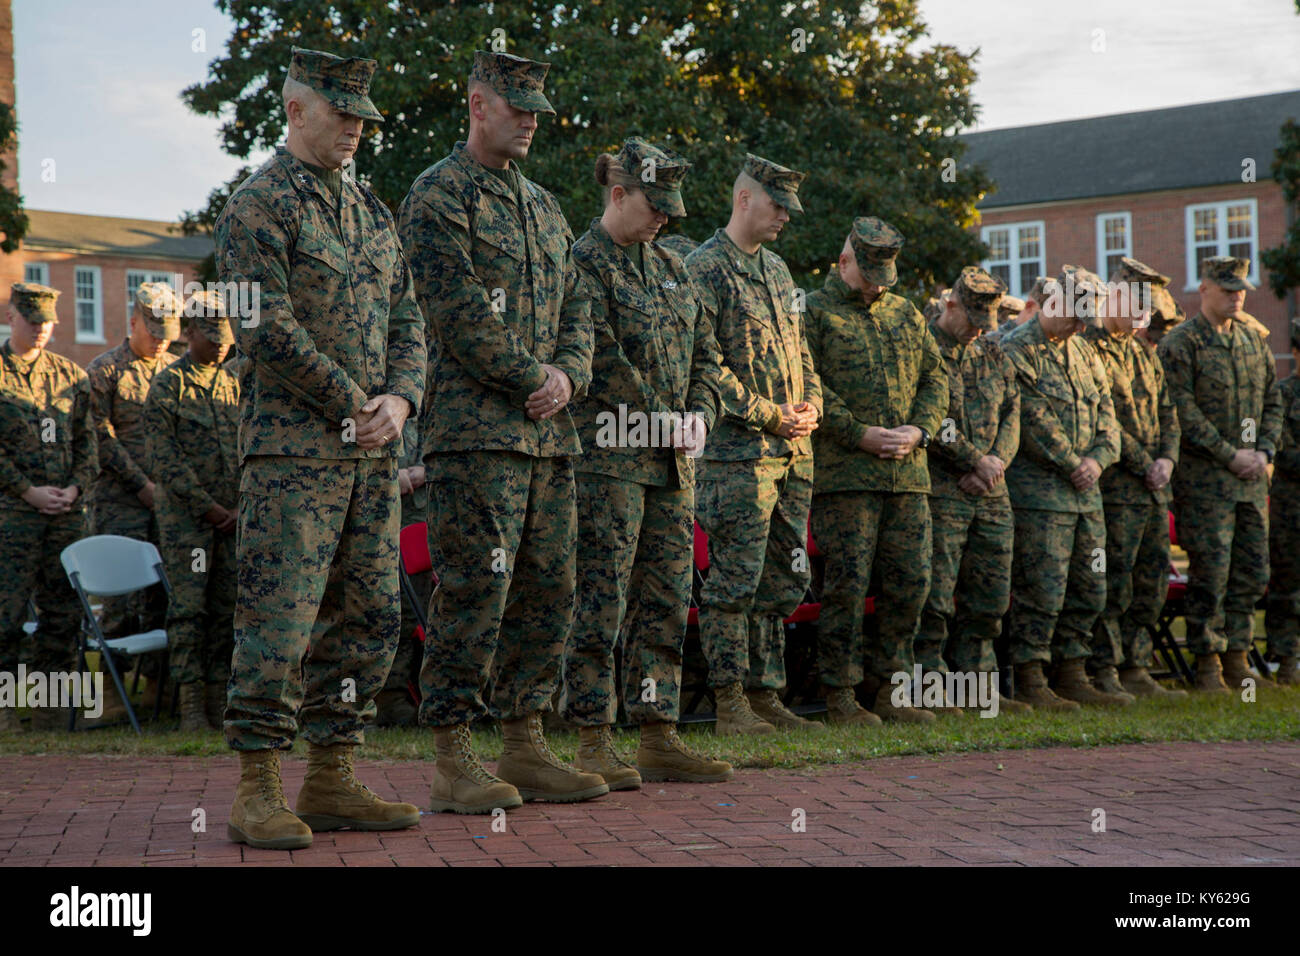 U.S. Marine Corps Maj. Gen. John K. Love, commanding general, 2nd Marine Division (2d MARDIV), left, Sgt. Maj. Michael P. Woods, sergeant major, 2d MARDIV, Senior Chief Petty Officer Jill Bankus bow their heads for the invocation during a morning colors award ceremony on Camp Lejeune, N.C., Dec. 12, 2017. The ceremony is held to honor colors as well as award Marines and Sailors. (U.S. Marine Corps Stock Photo